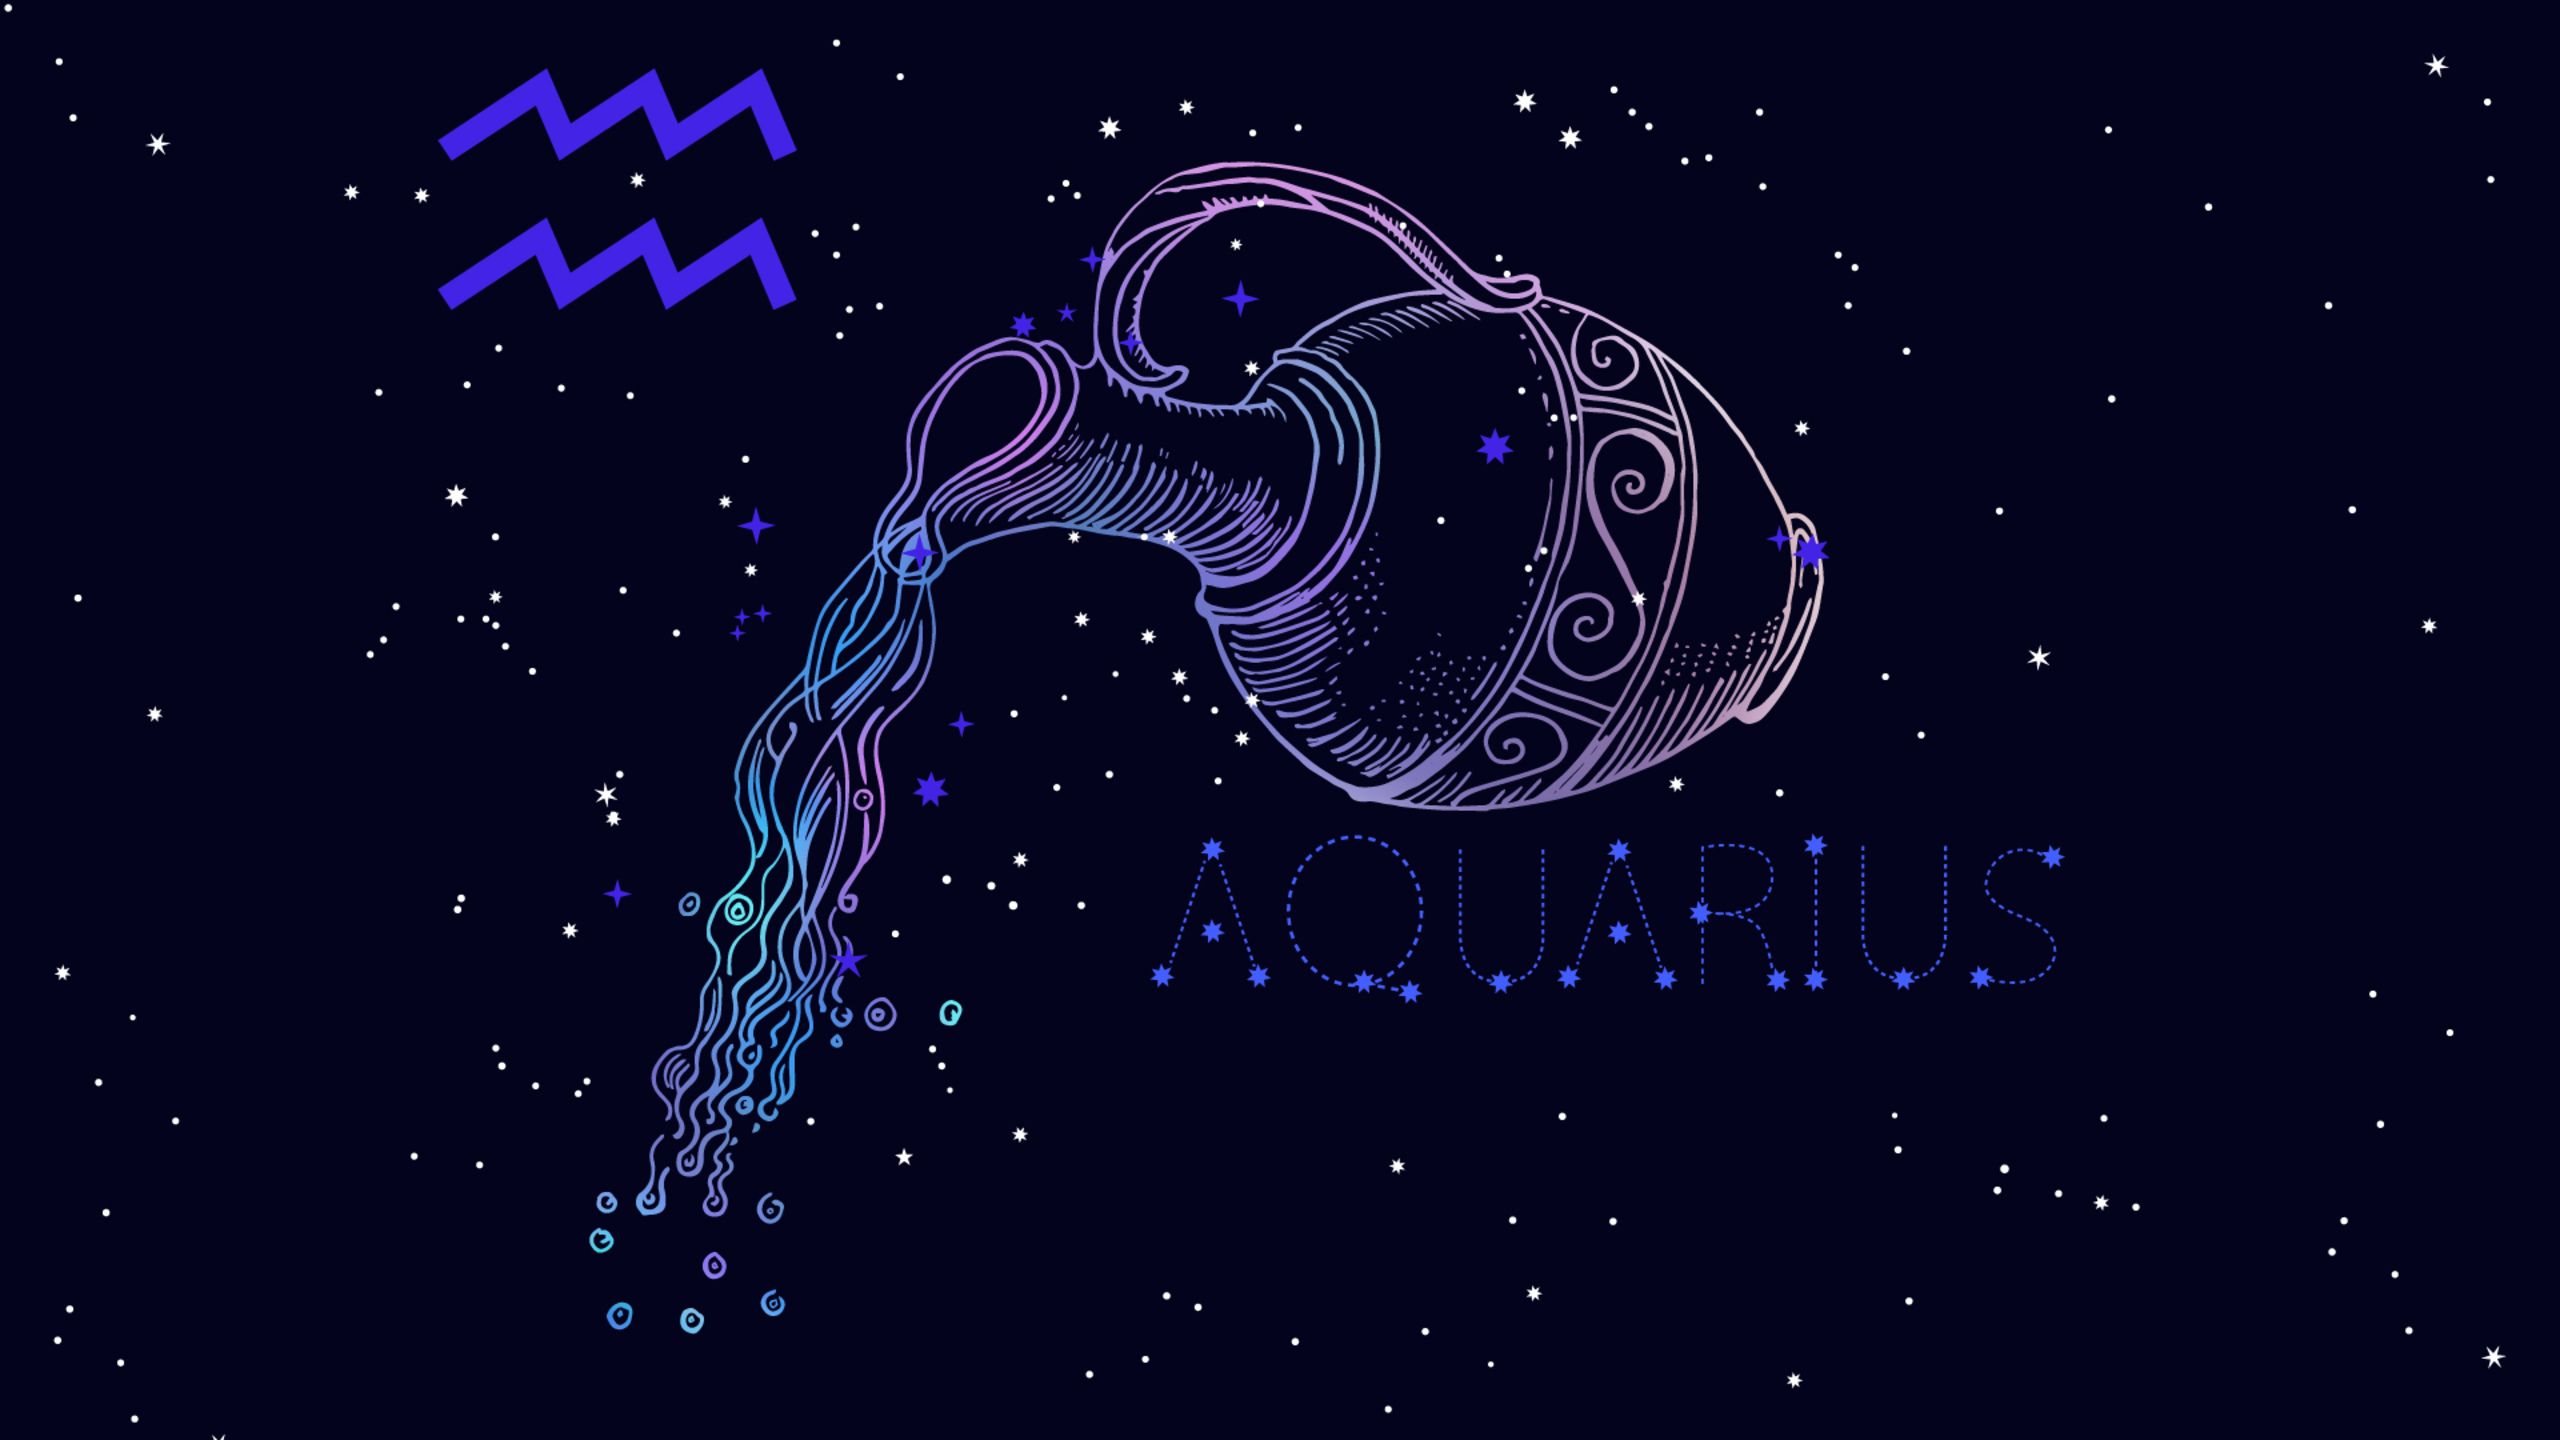 Aquarius is the eleventh sign of the zodiac, and is represented by the water carrier - Aquarius